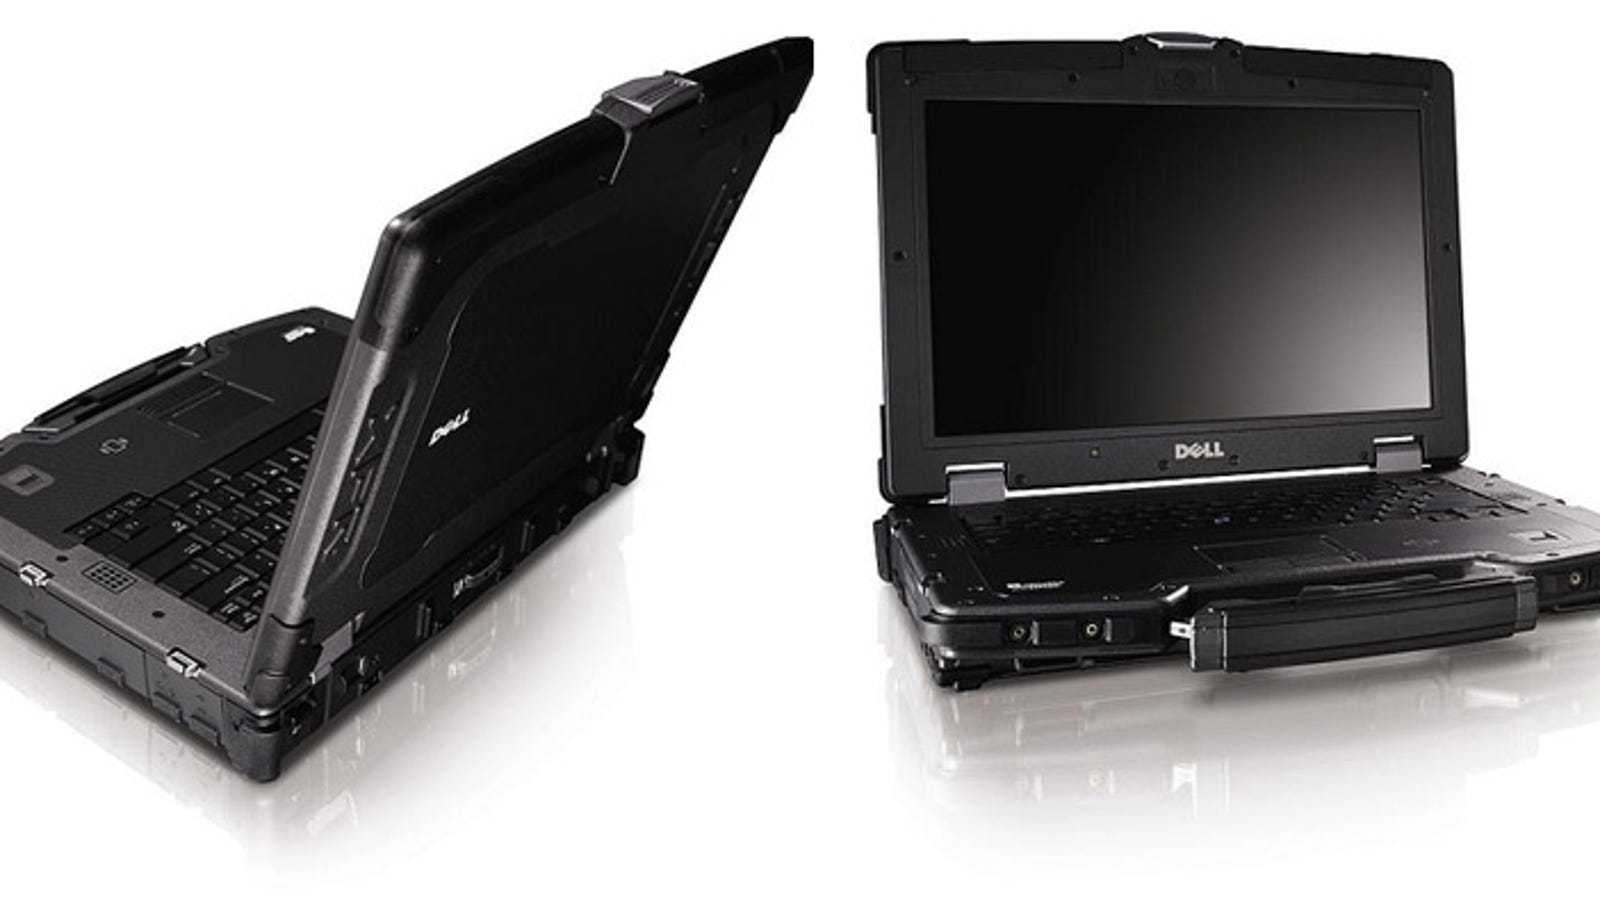 Dell Latitude E6400 XFR Could Probably Double as Bullet Proof Armor